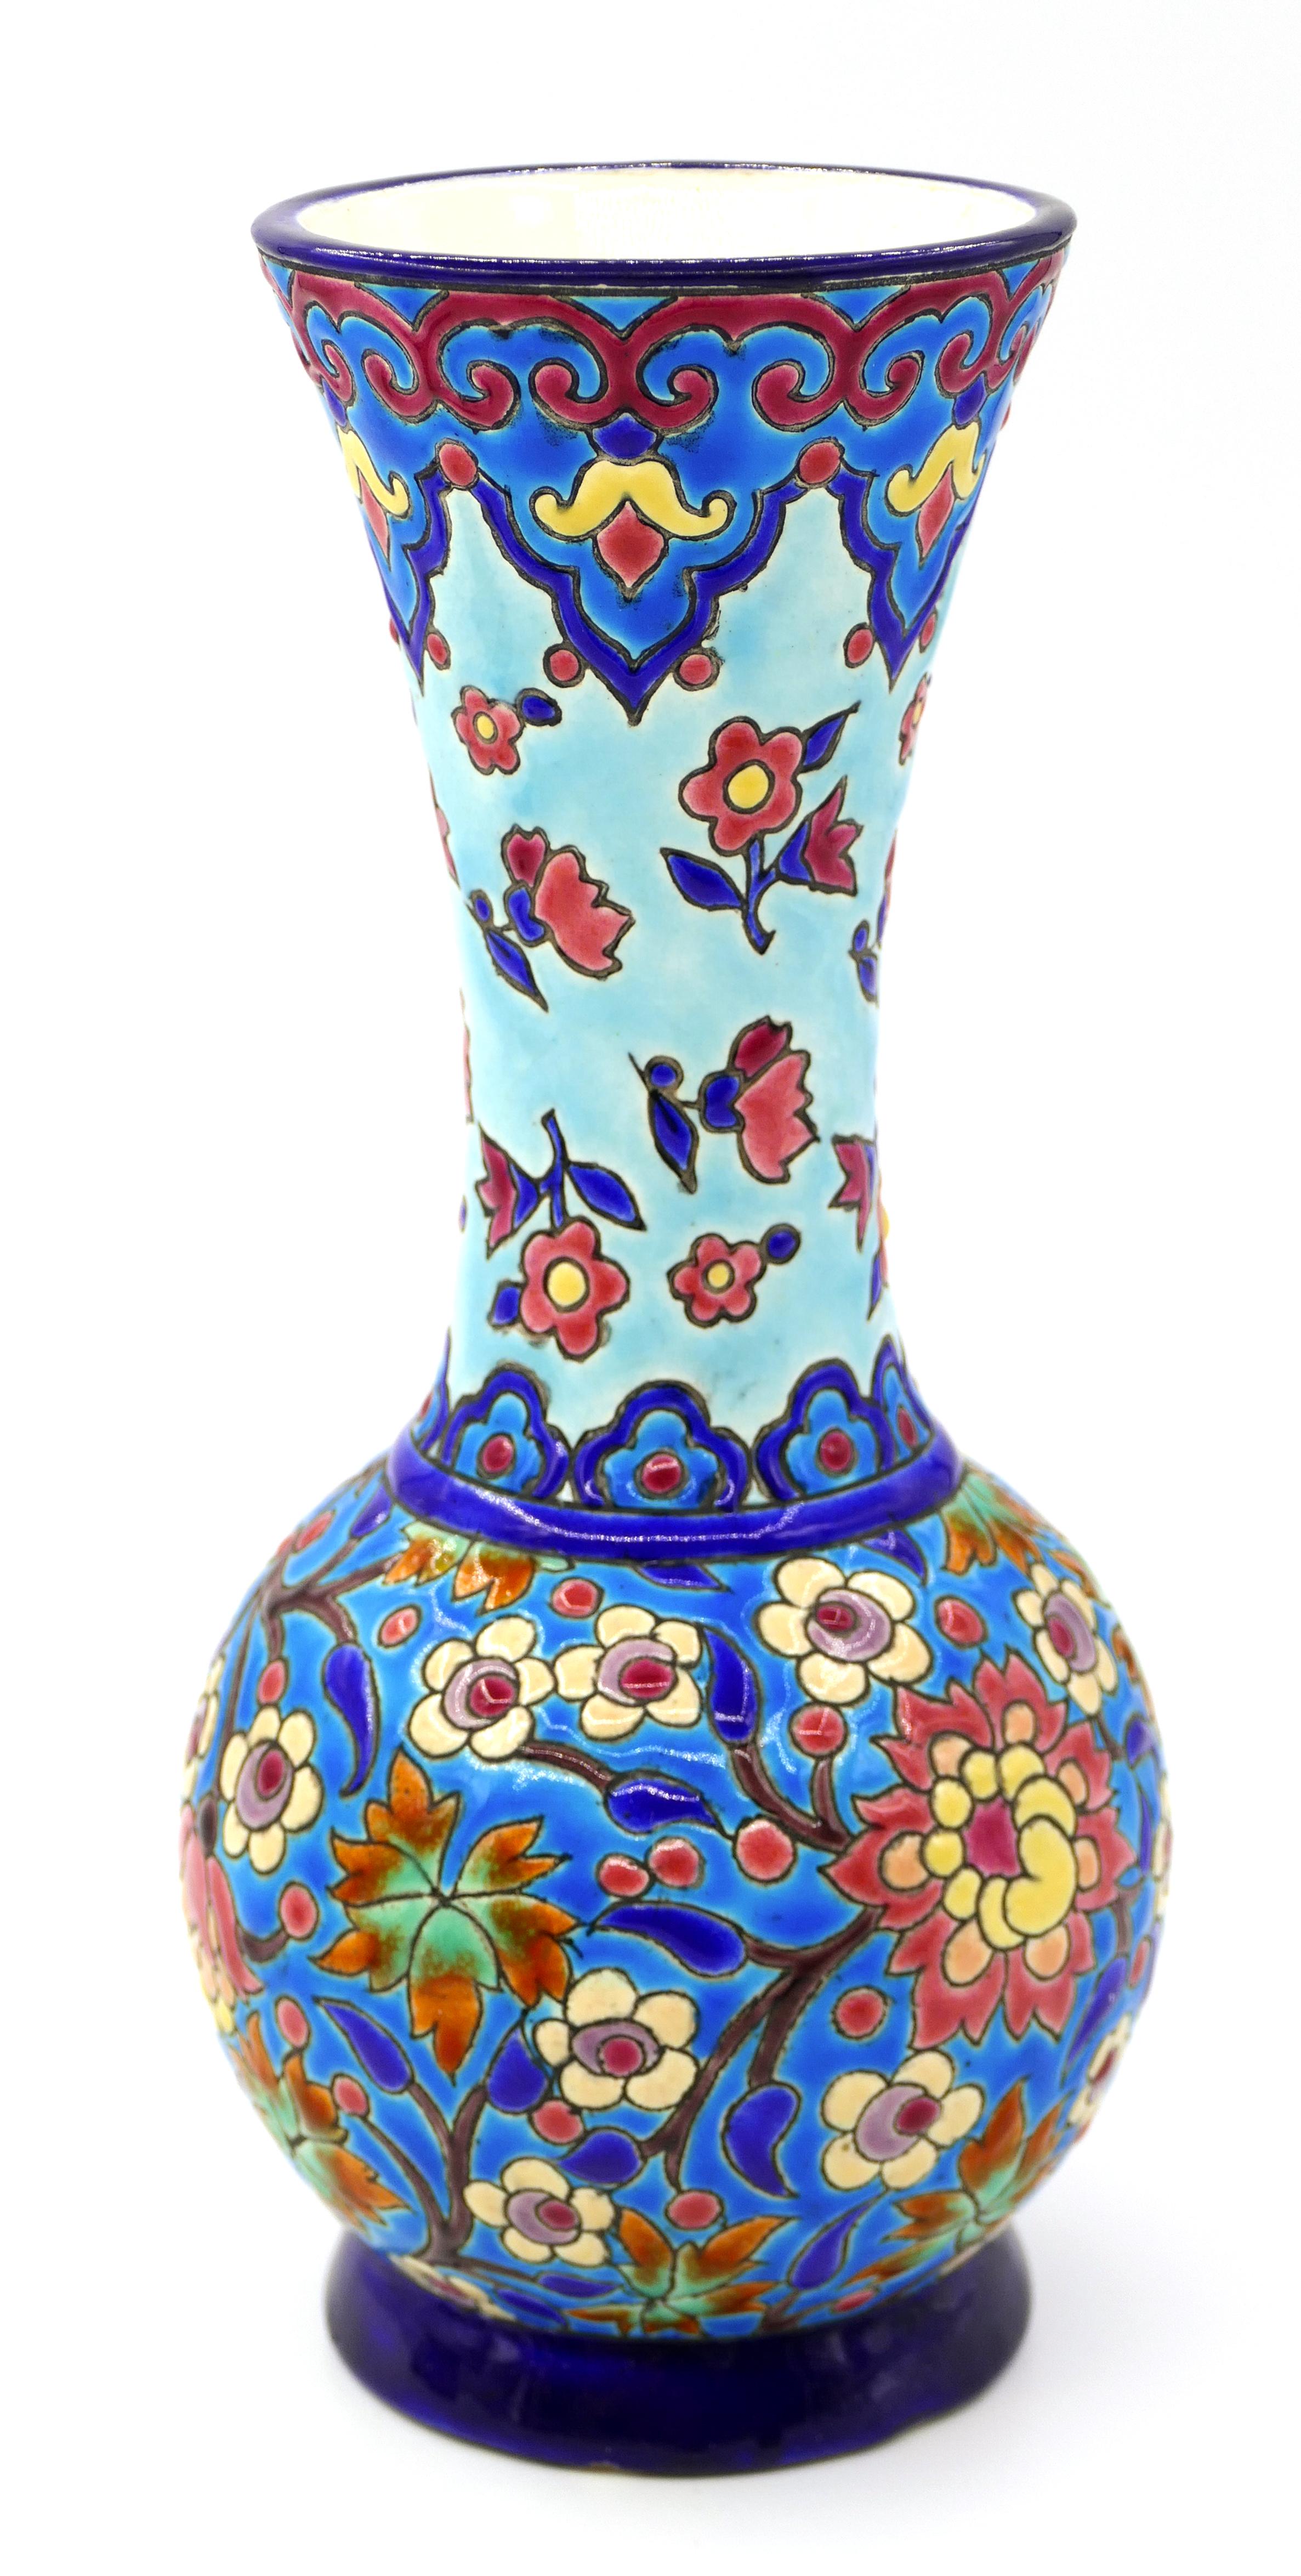 This is a beautiful lot composed by a vase and a round box, produced by Émaux de Longwy, an important pottery workshop in France, in the first 20th century, but superbly hand-decorated.

A colorful ceramic vase and a box with a floreal leit-motif